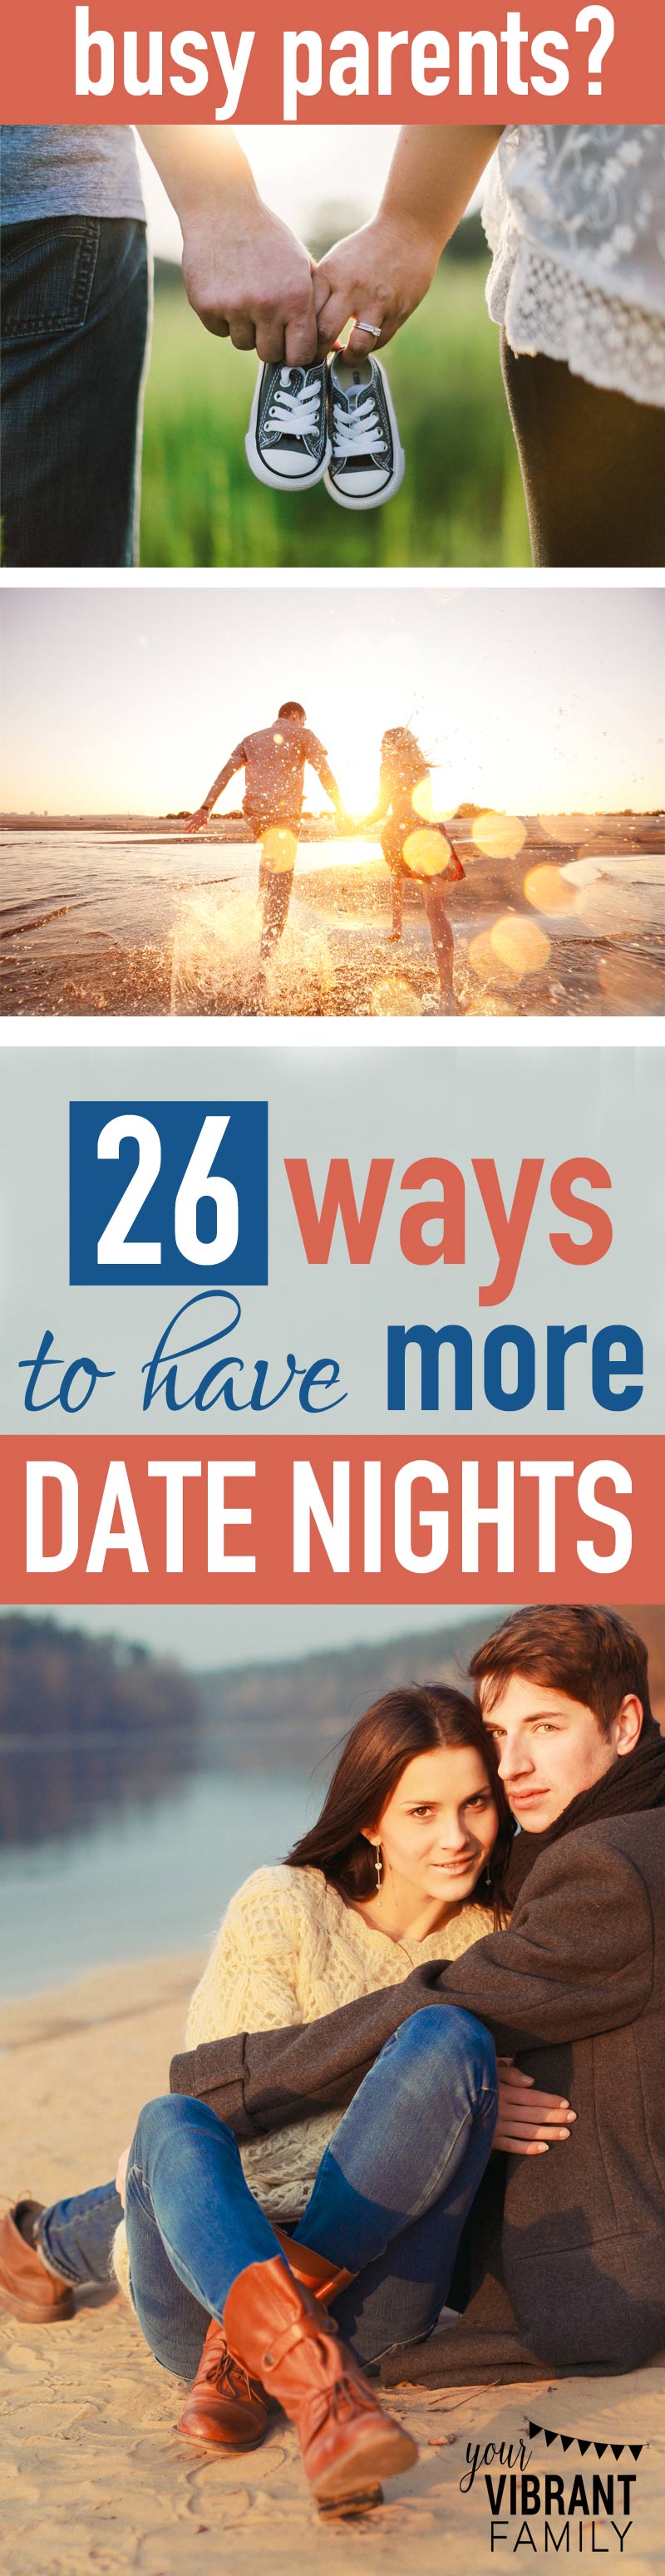 You know date nights can really strengthen your marriage. But how in the world do you make them happen? Discover the 6 most common reasons why couples don’t plan more date nights, and learn 26 amazingly creative ways to solve them! This post will give you the tools and ideas you need to REALISTICALLY add date nights as a regular part of your marriage! If you’ve been stumped about how to make date nights really happen, you’ve GOT to read this post!